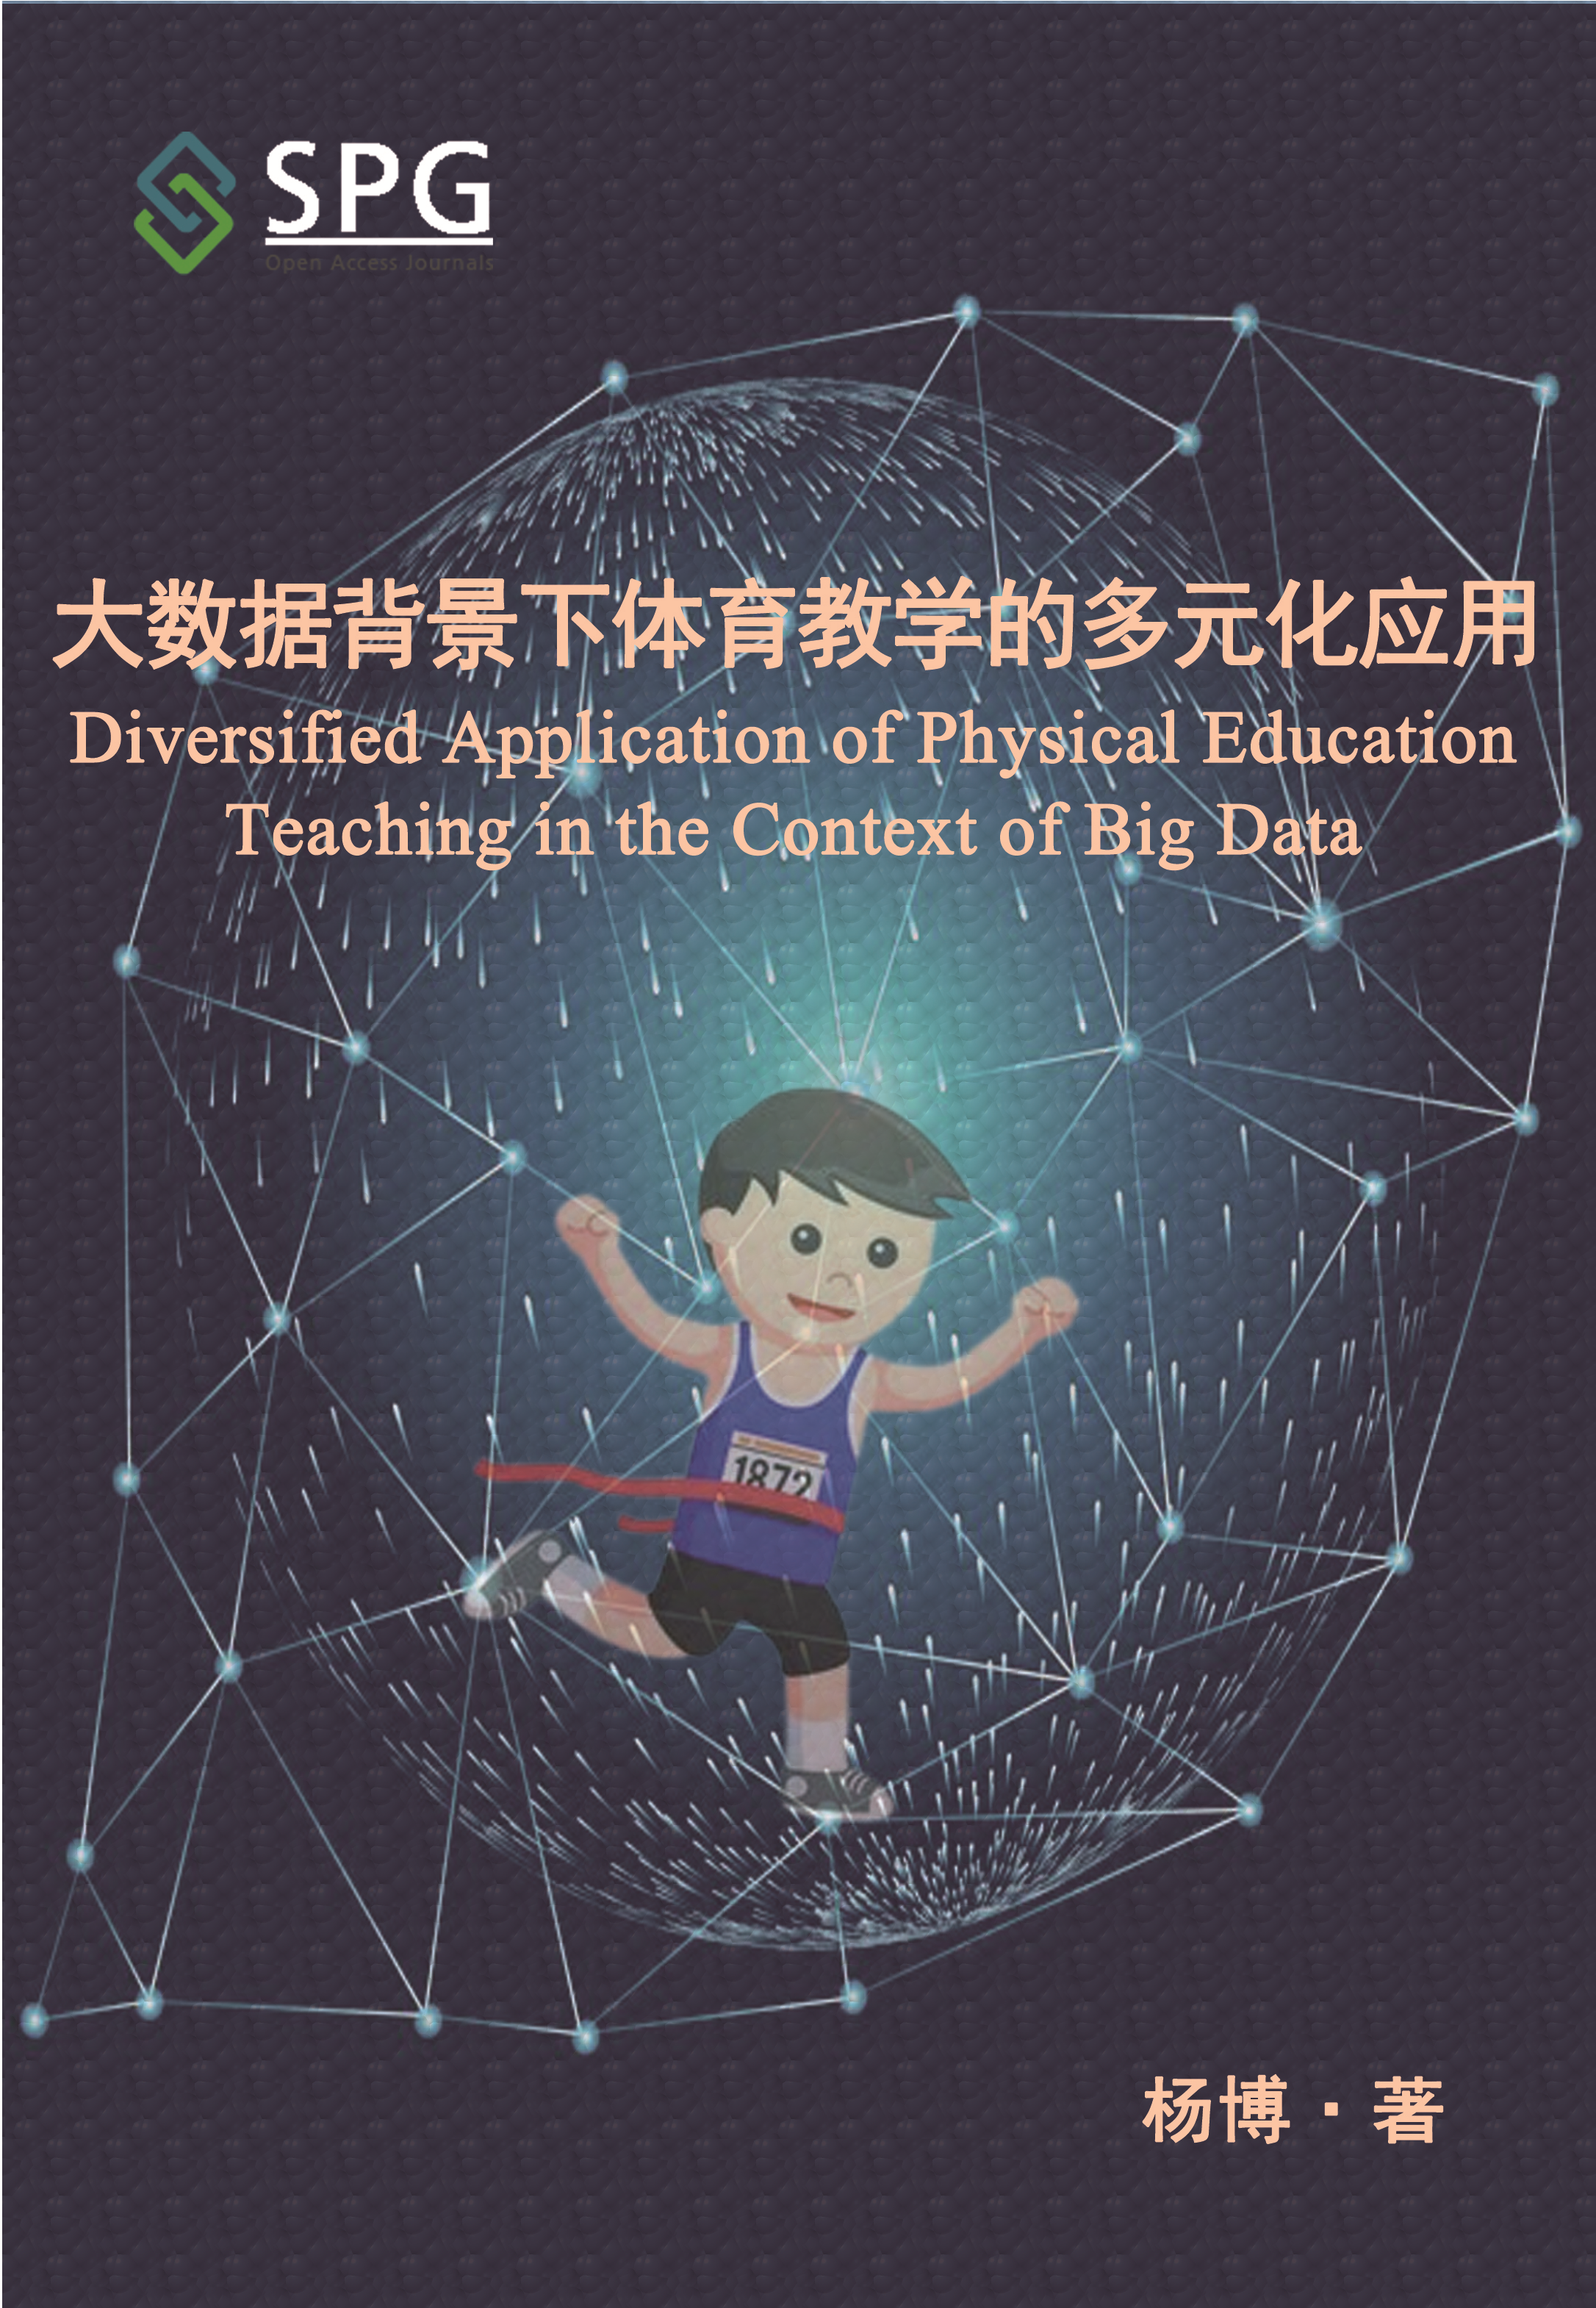 Diversified Application of Physical Education Teaching in the Context of Big Data | Scholar Publishing Group